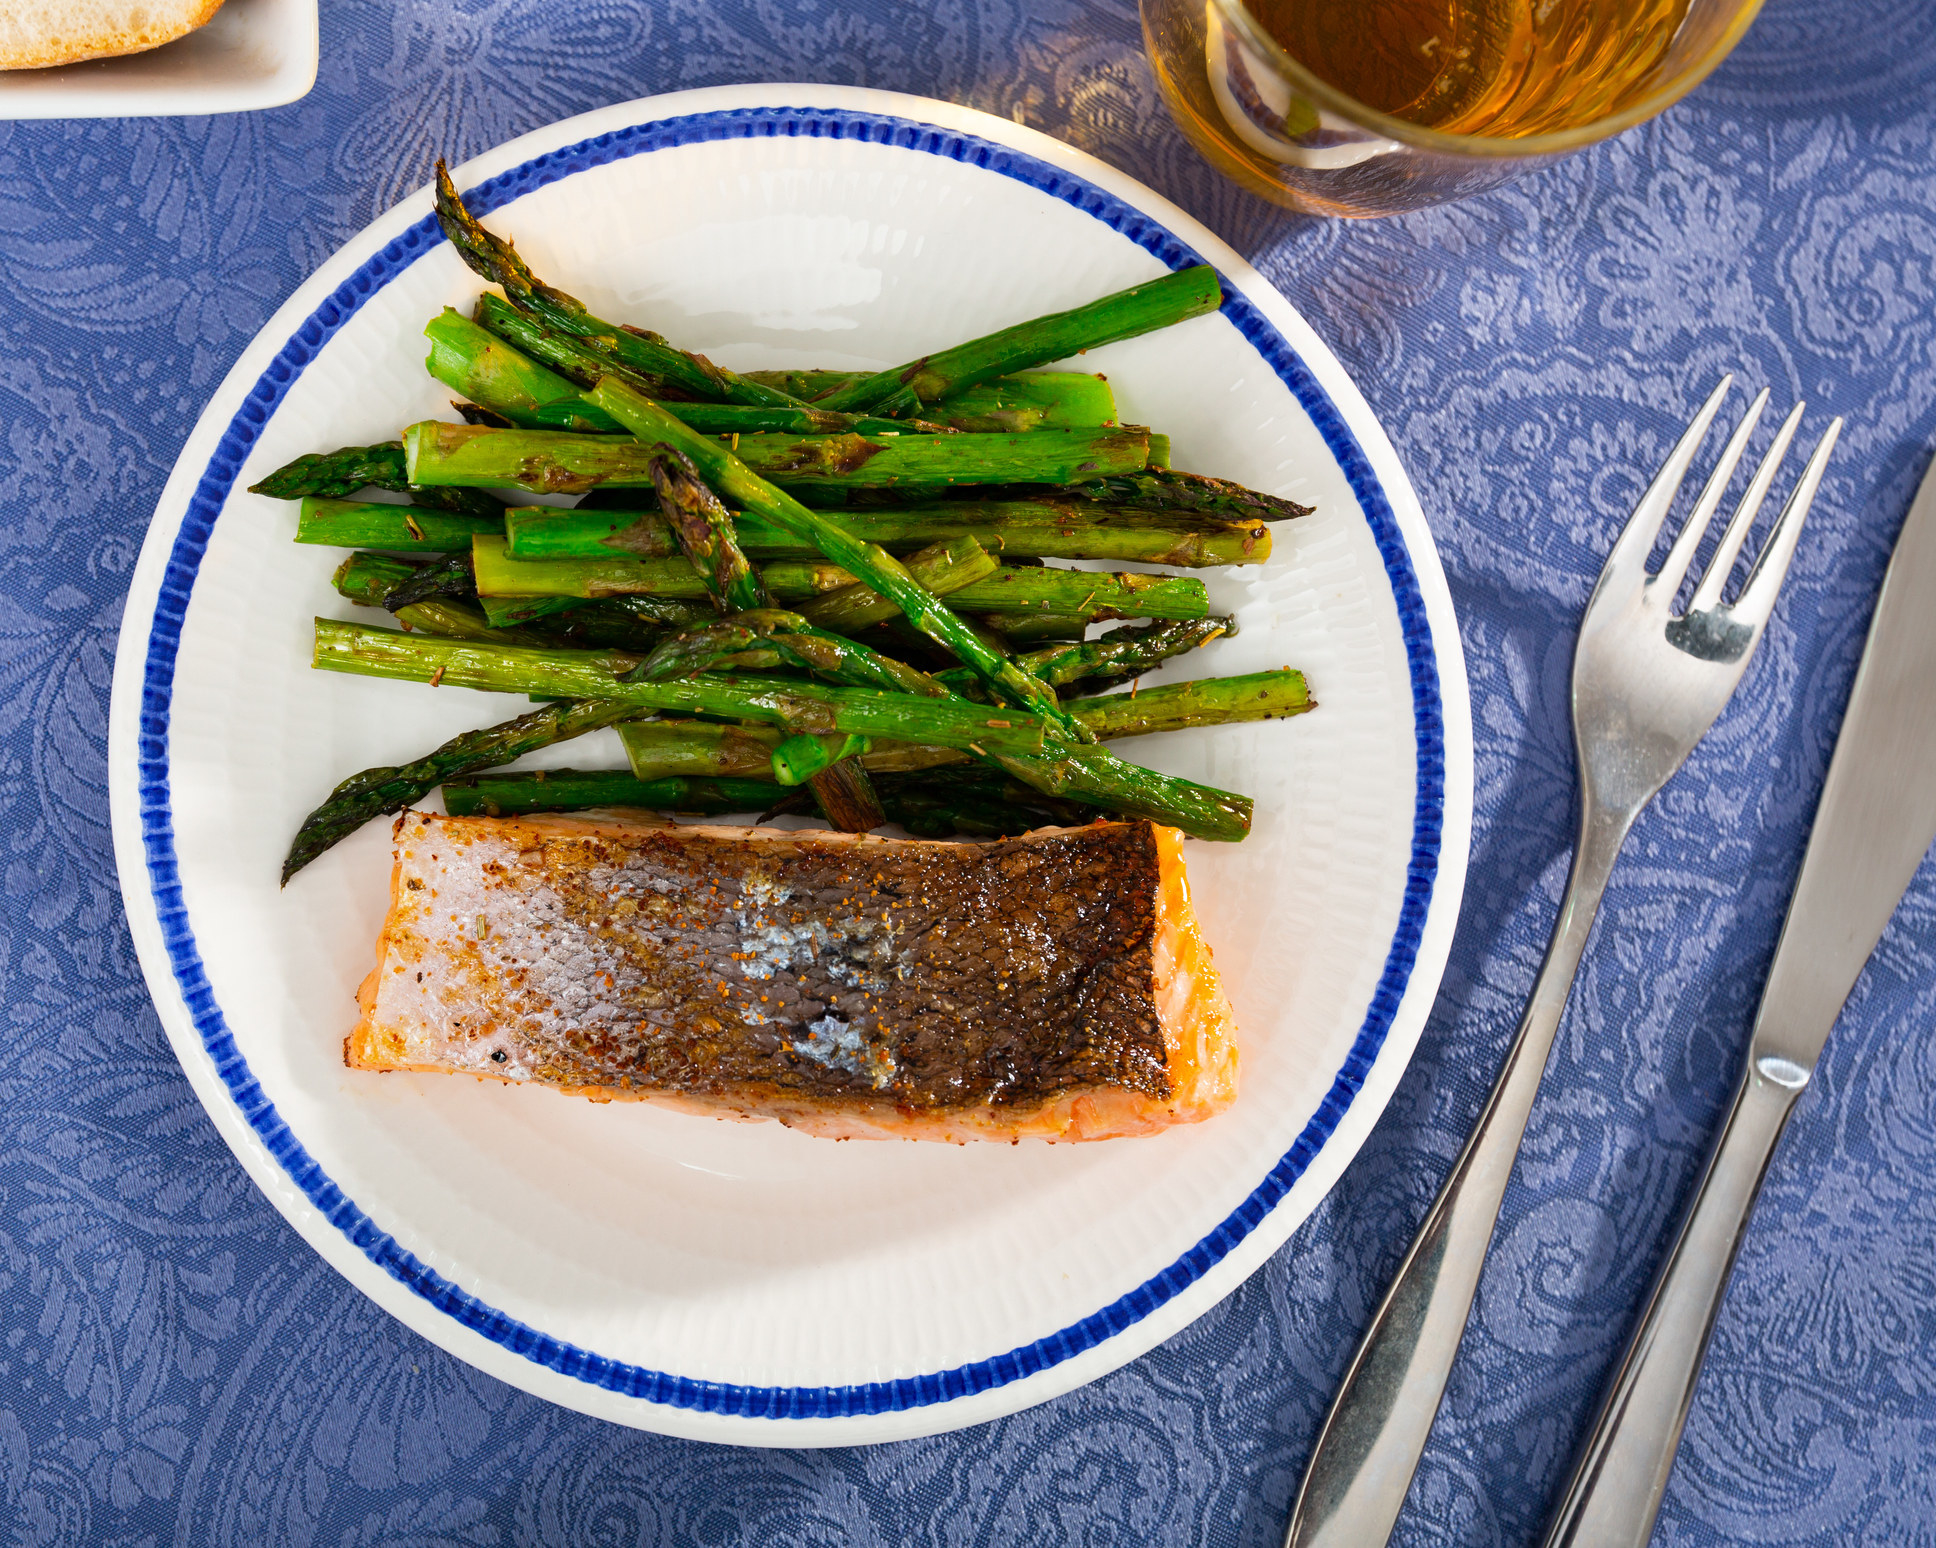 A piece of salmon with a side of asparagus